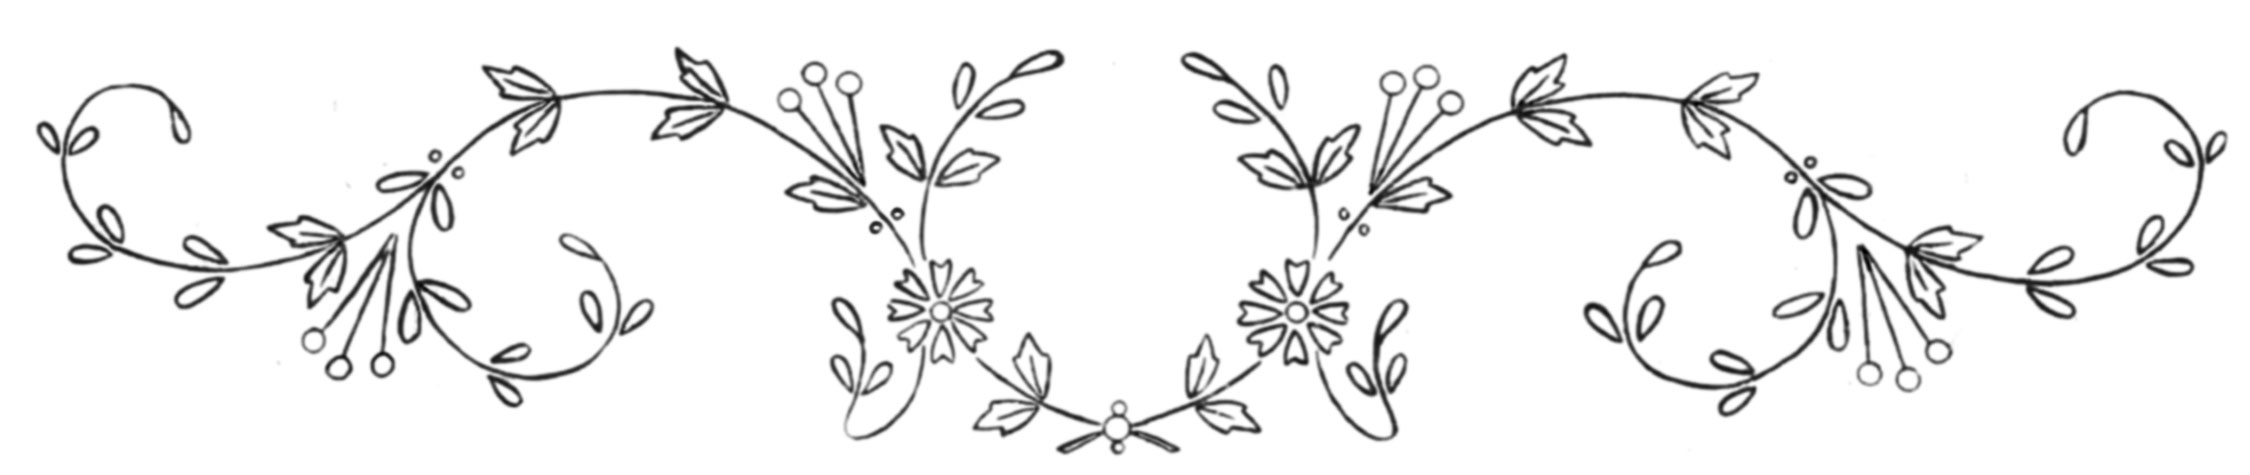 Victorian Embroidery Patterns Free Pattern Friday Embroidery Designs For Pillowcases Q Is For